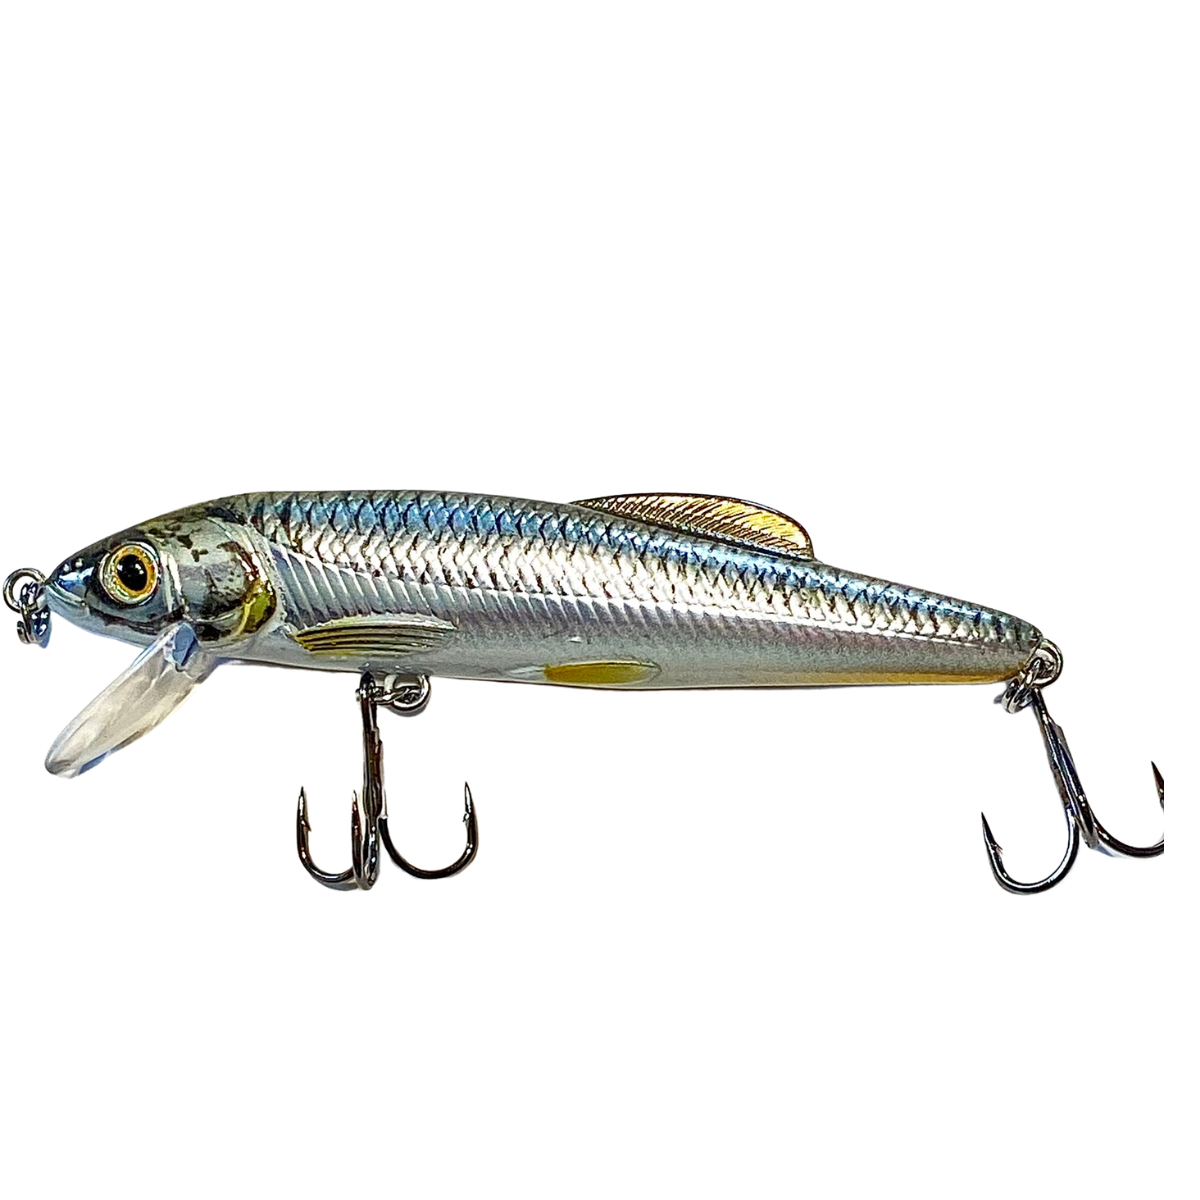 LIVE TARGET POISSON NAGEUR MINNOW FINESSE SILVER / PEARL 2 1 / 2 1 / 8OZ